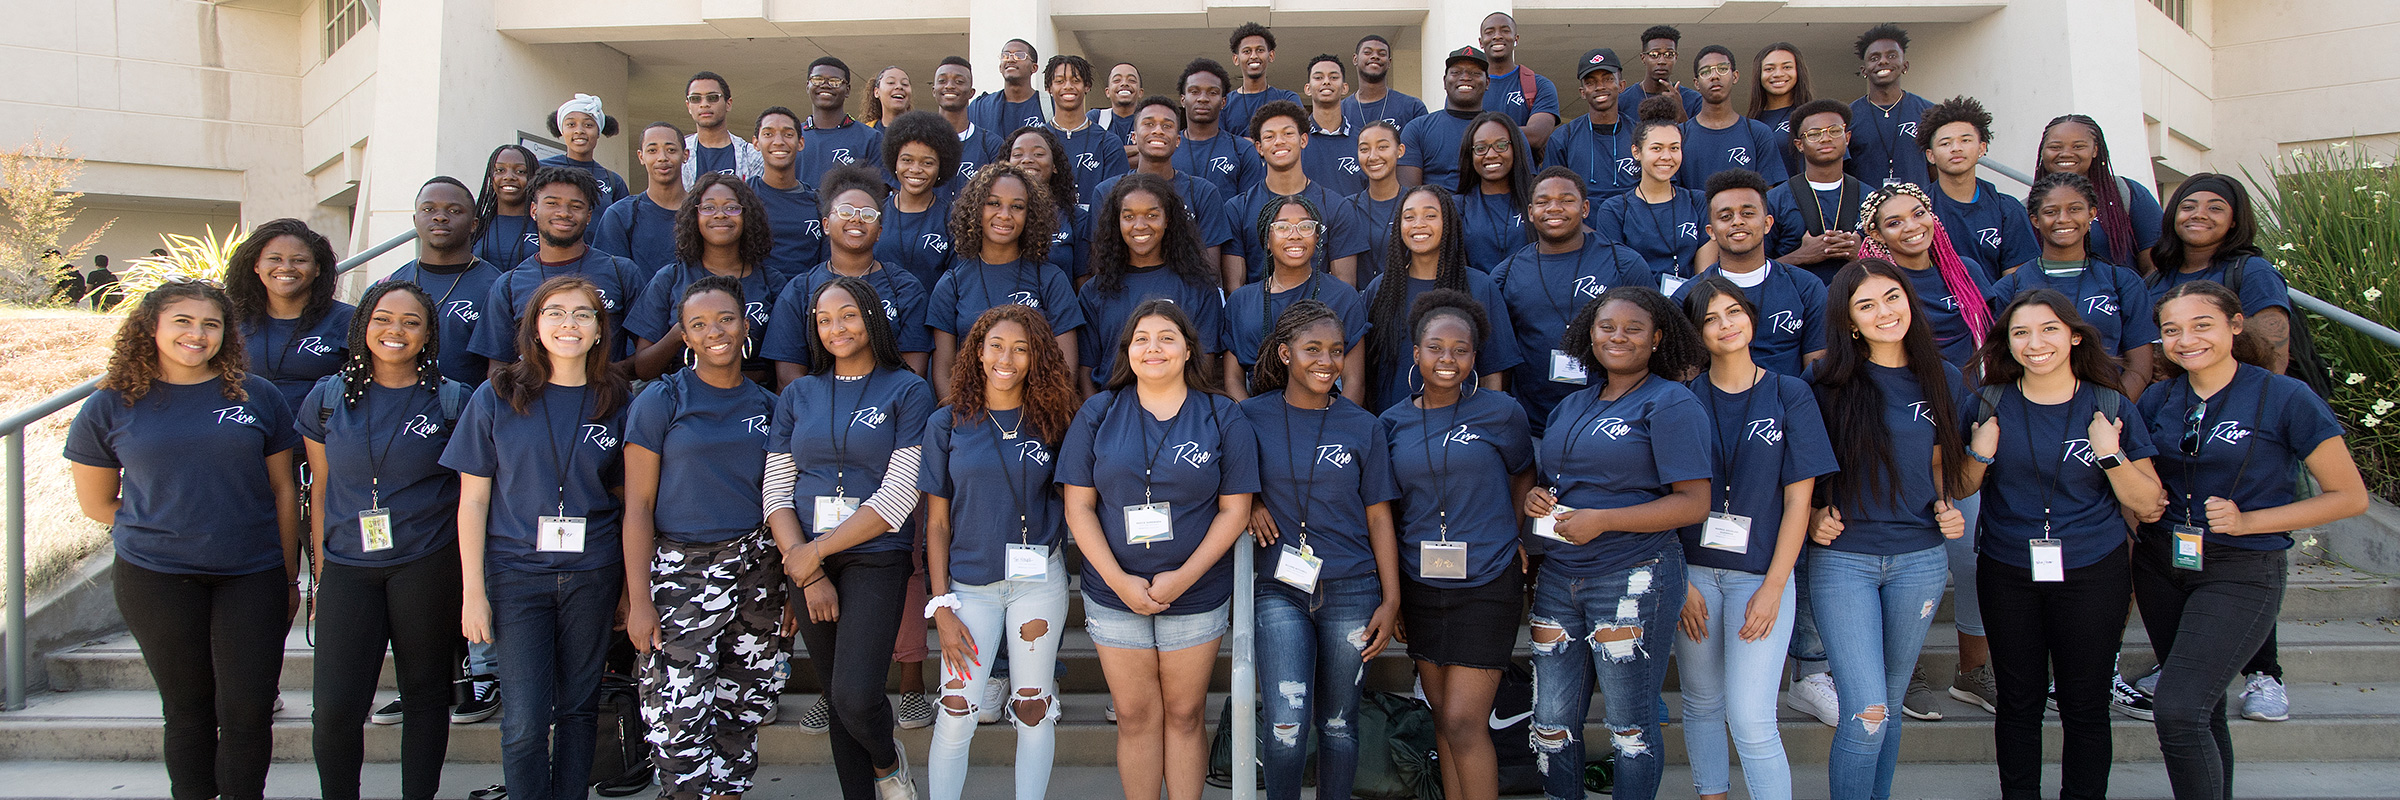 The 2019 cohort of Rise Students pose for a photo.